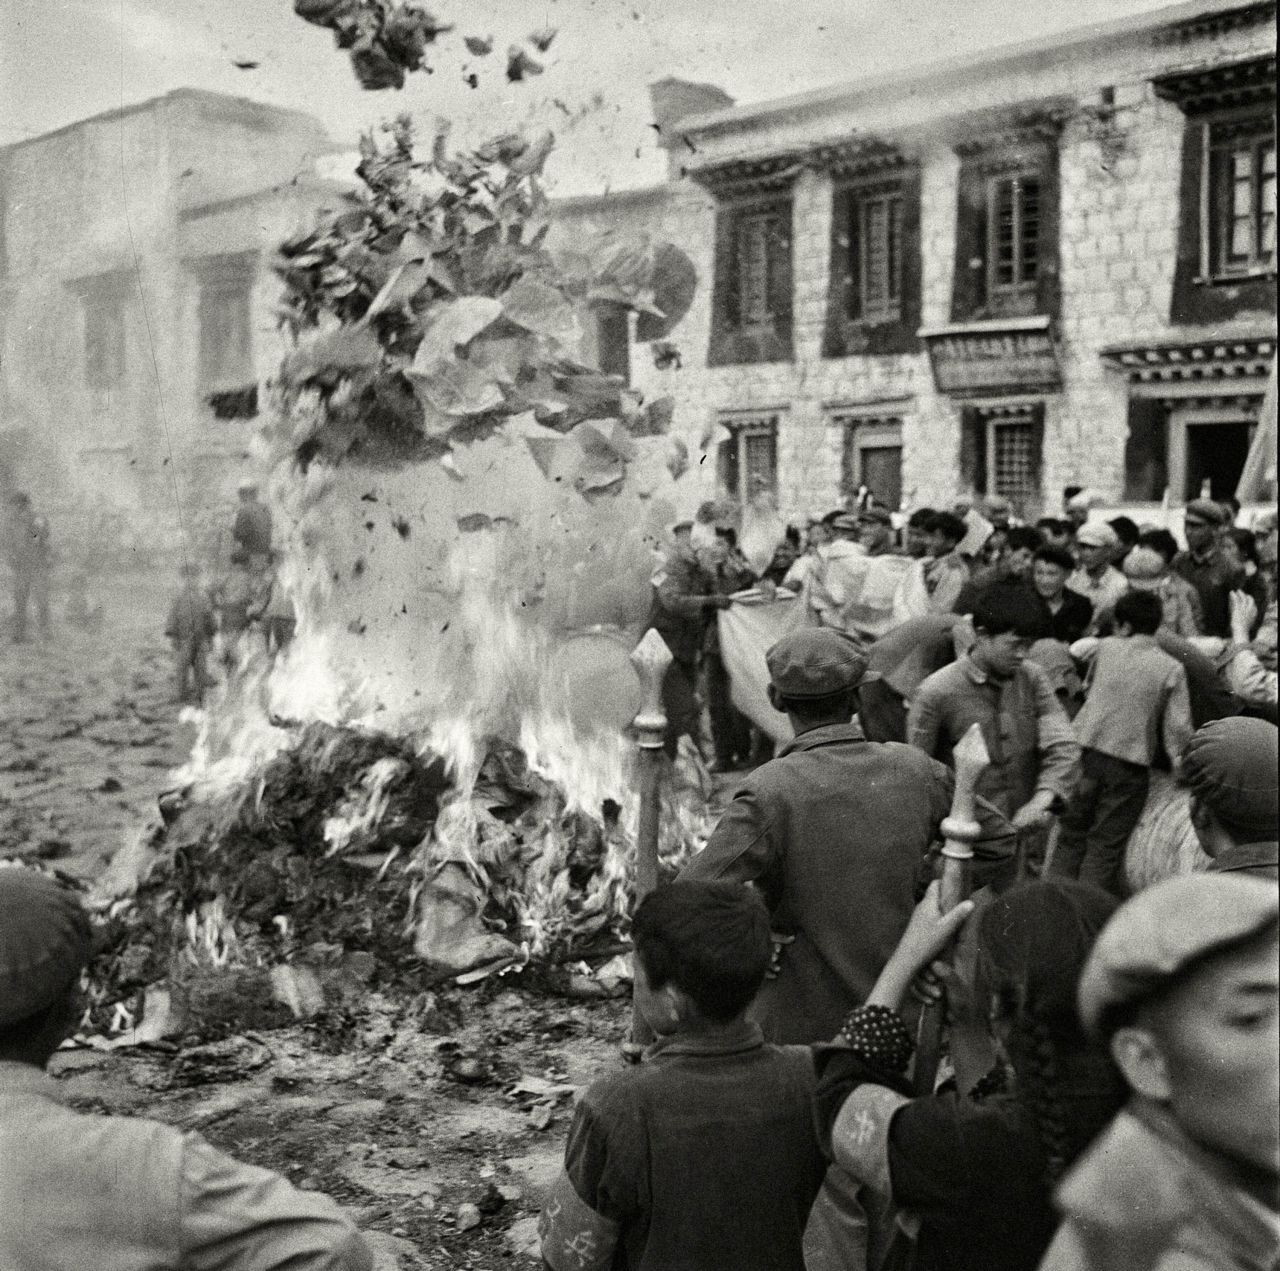 Chinese people burn books in 1966 during the country's Cultural Revolution, a state-led campaign to destroy literature, art and architecture deemed not revolutionary or modern enough. <a href="https://www.cnn.com/2019/09/29/asia/china-beijing-mao-october-1-70-intl-hnk/index.html" target="_blank">Mao tried cling to power</a> by building a fanatical personality cult around himself and his ideas, which threw the country into chaos. He set the People's Liberation Army and students — young Mao supporters known as the Red Guards — on witch hunts against his opponents. Over the next decade, millions of Chinese suffered or perished, particularly teachers, writers, artists, party leaders — anyone determined to be "reactionary" in some way.